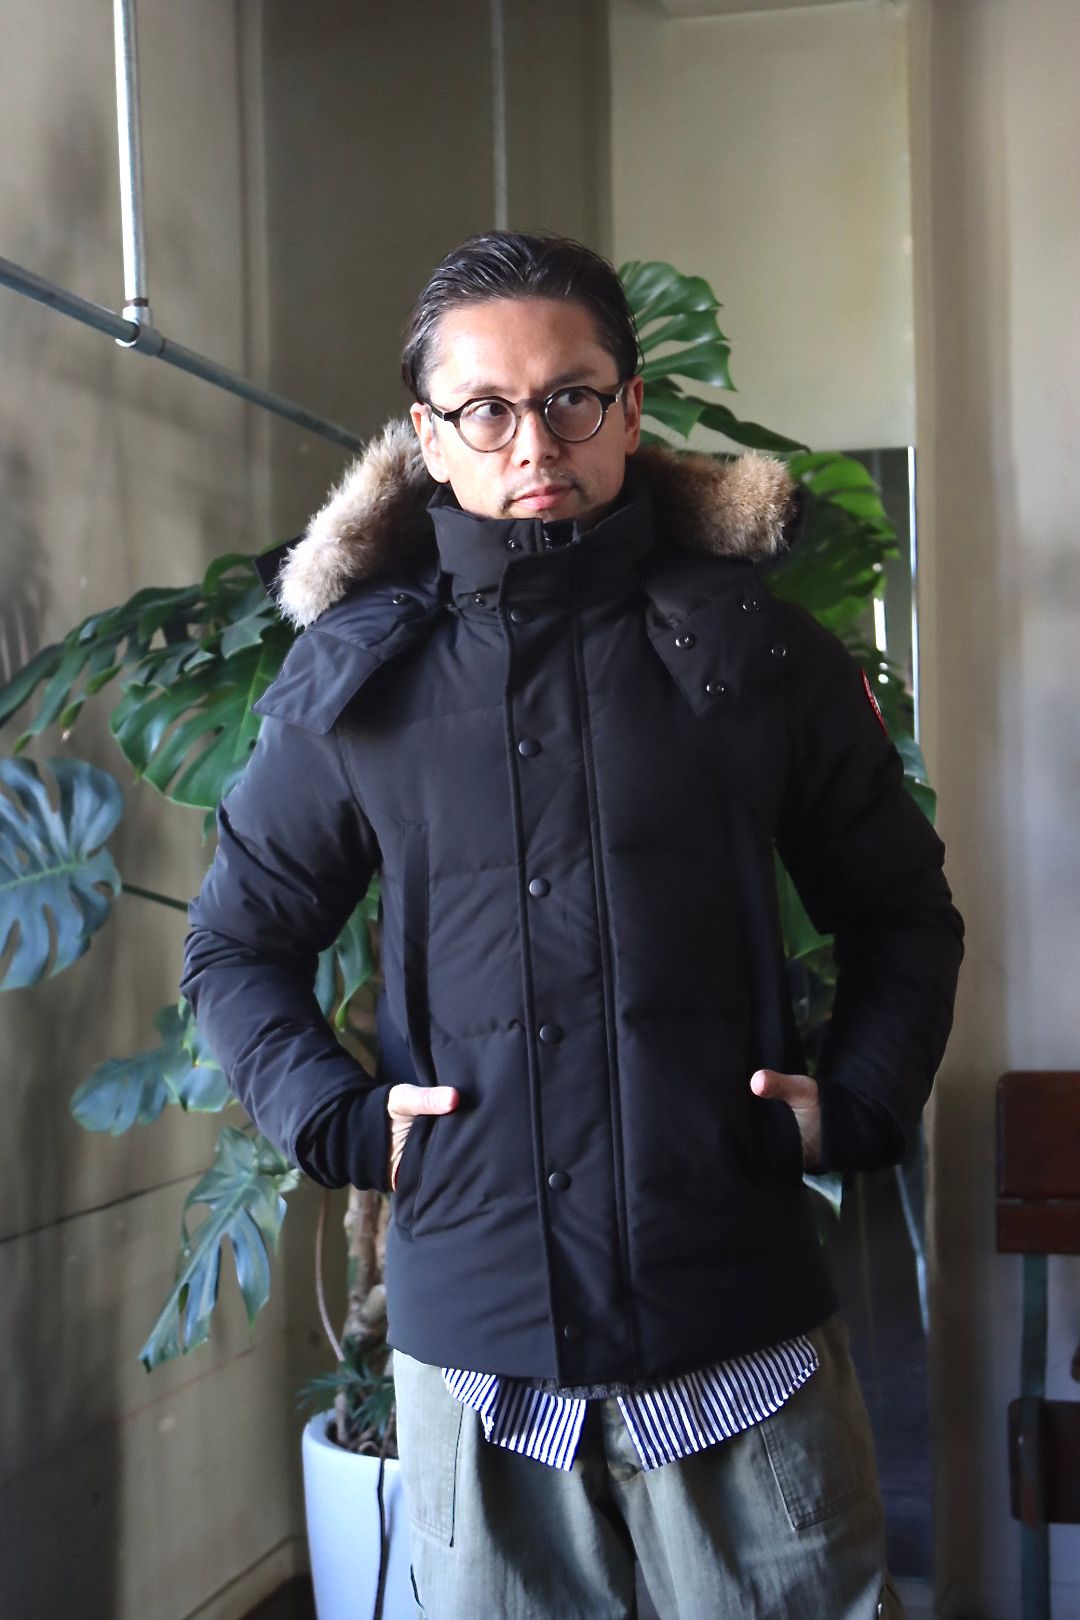 CANADA GOOSE - WYNDHAM PARKA FF ウィンダムパーカ (MEN'S STYLE 